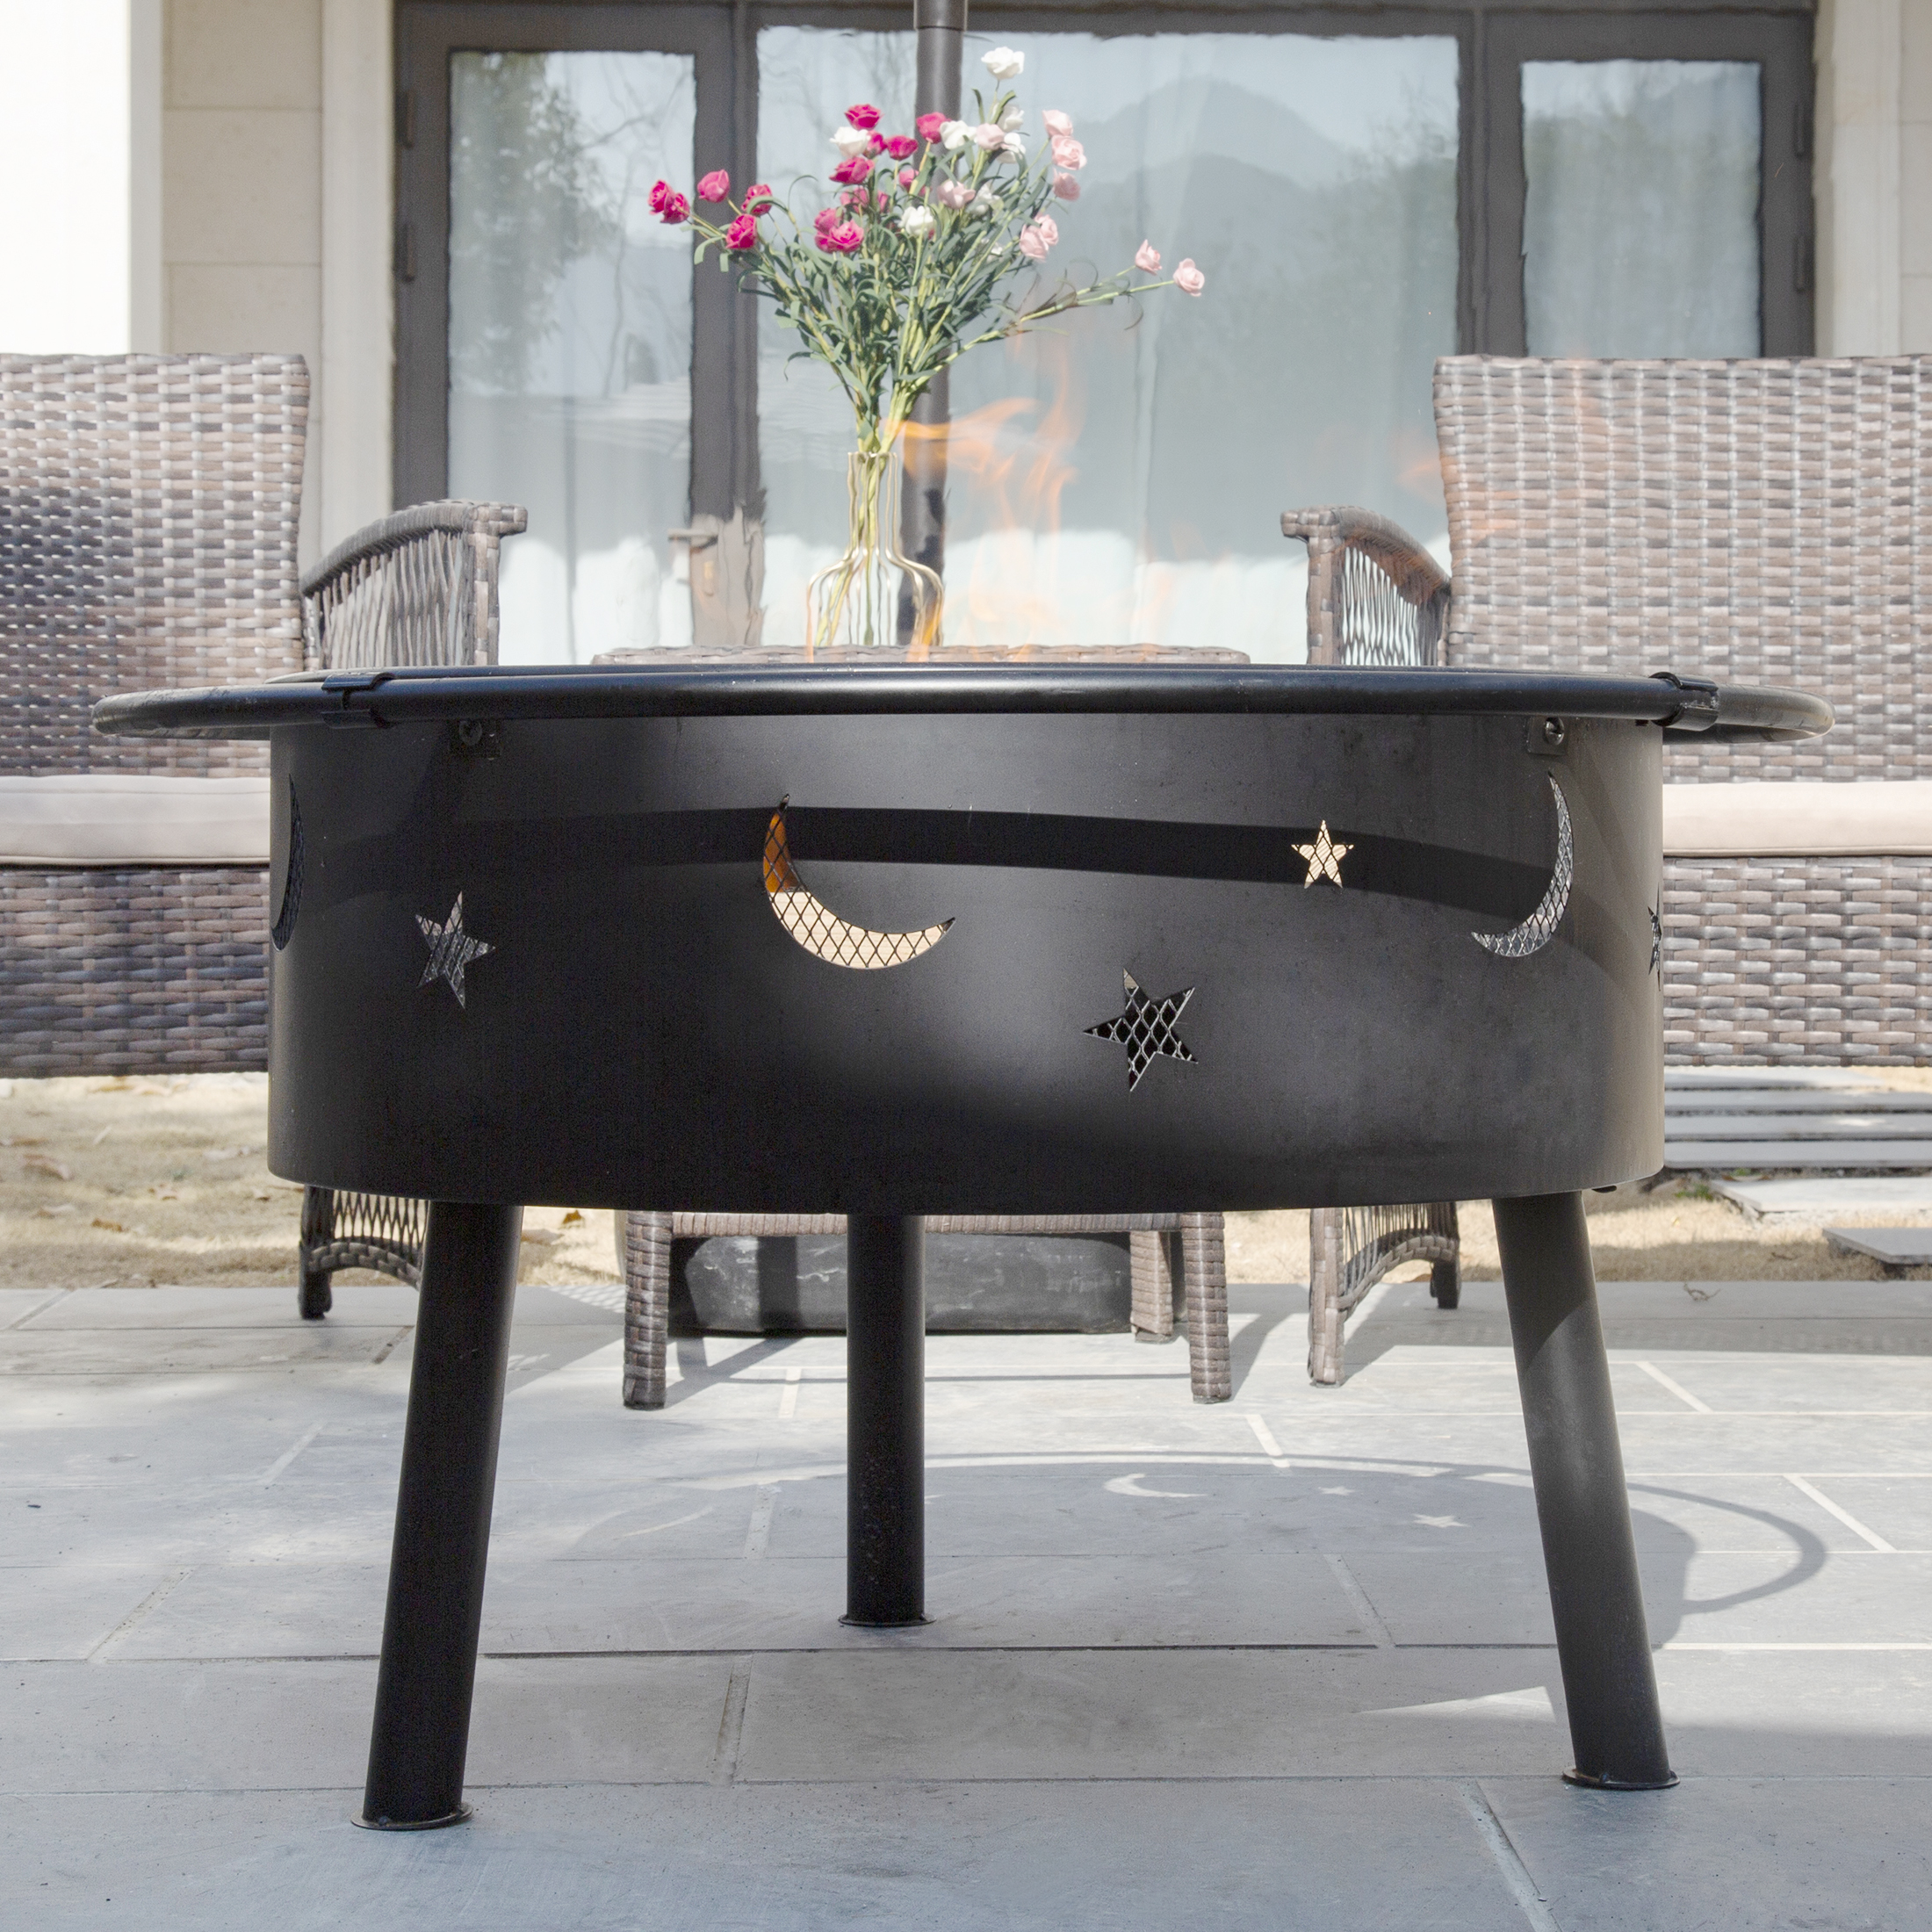 Star and Moon Steel Wood Burning Round Fire Pit - image 2 of 21